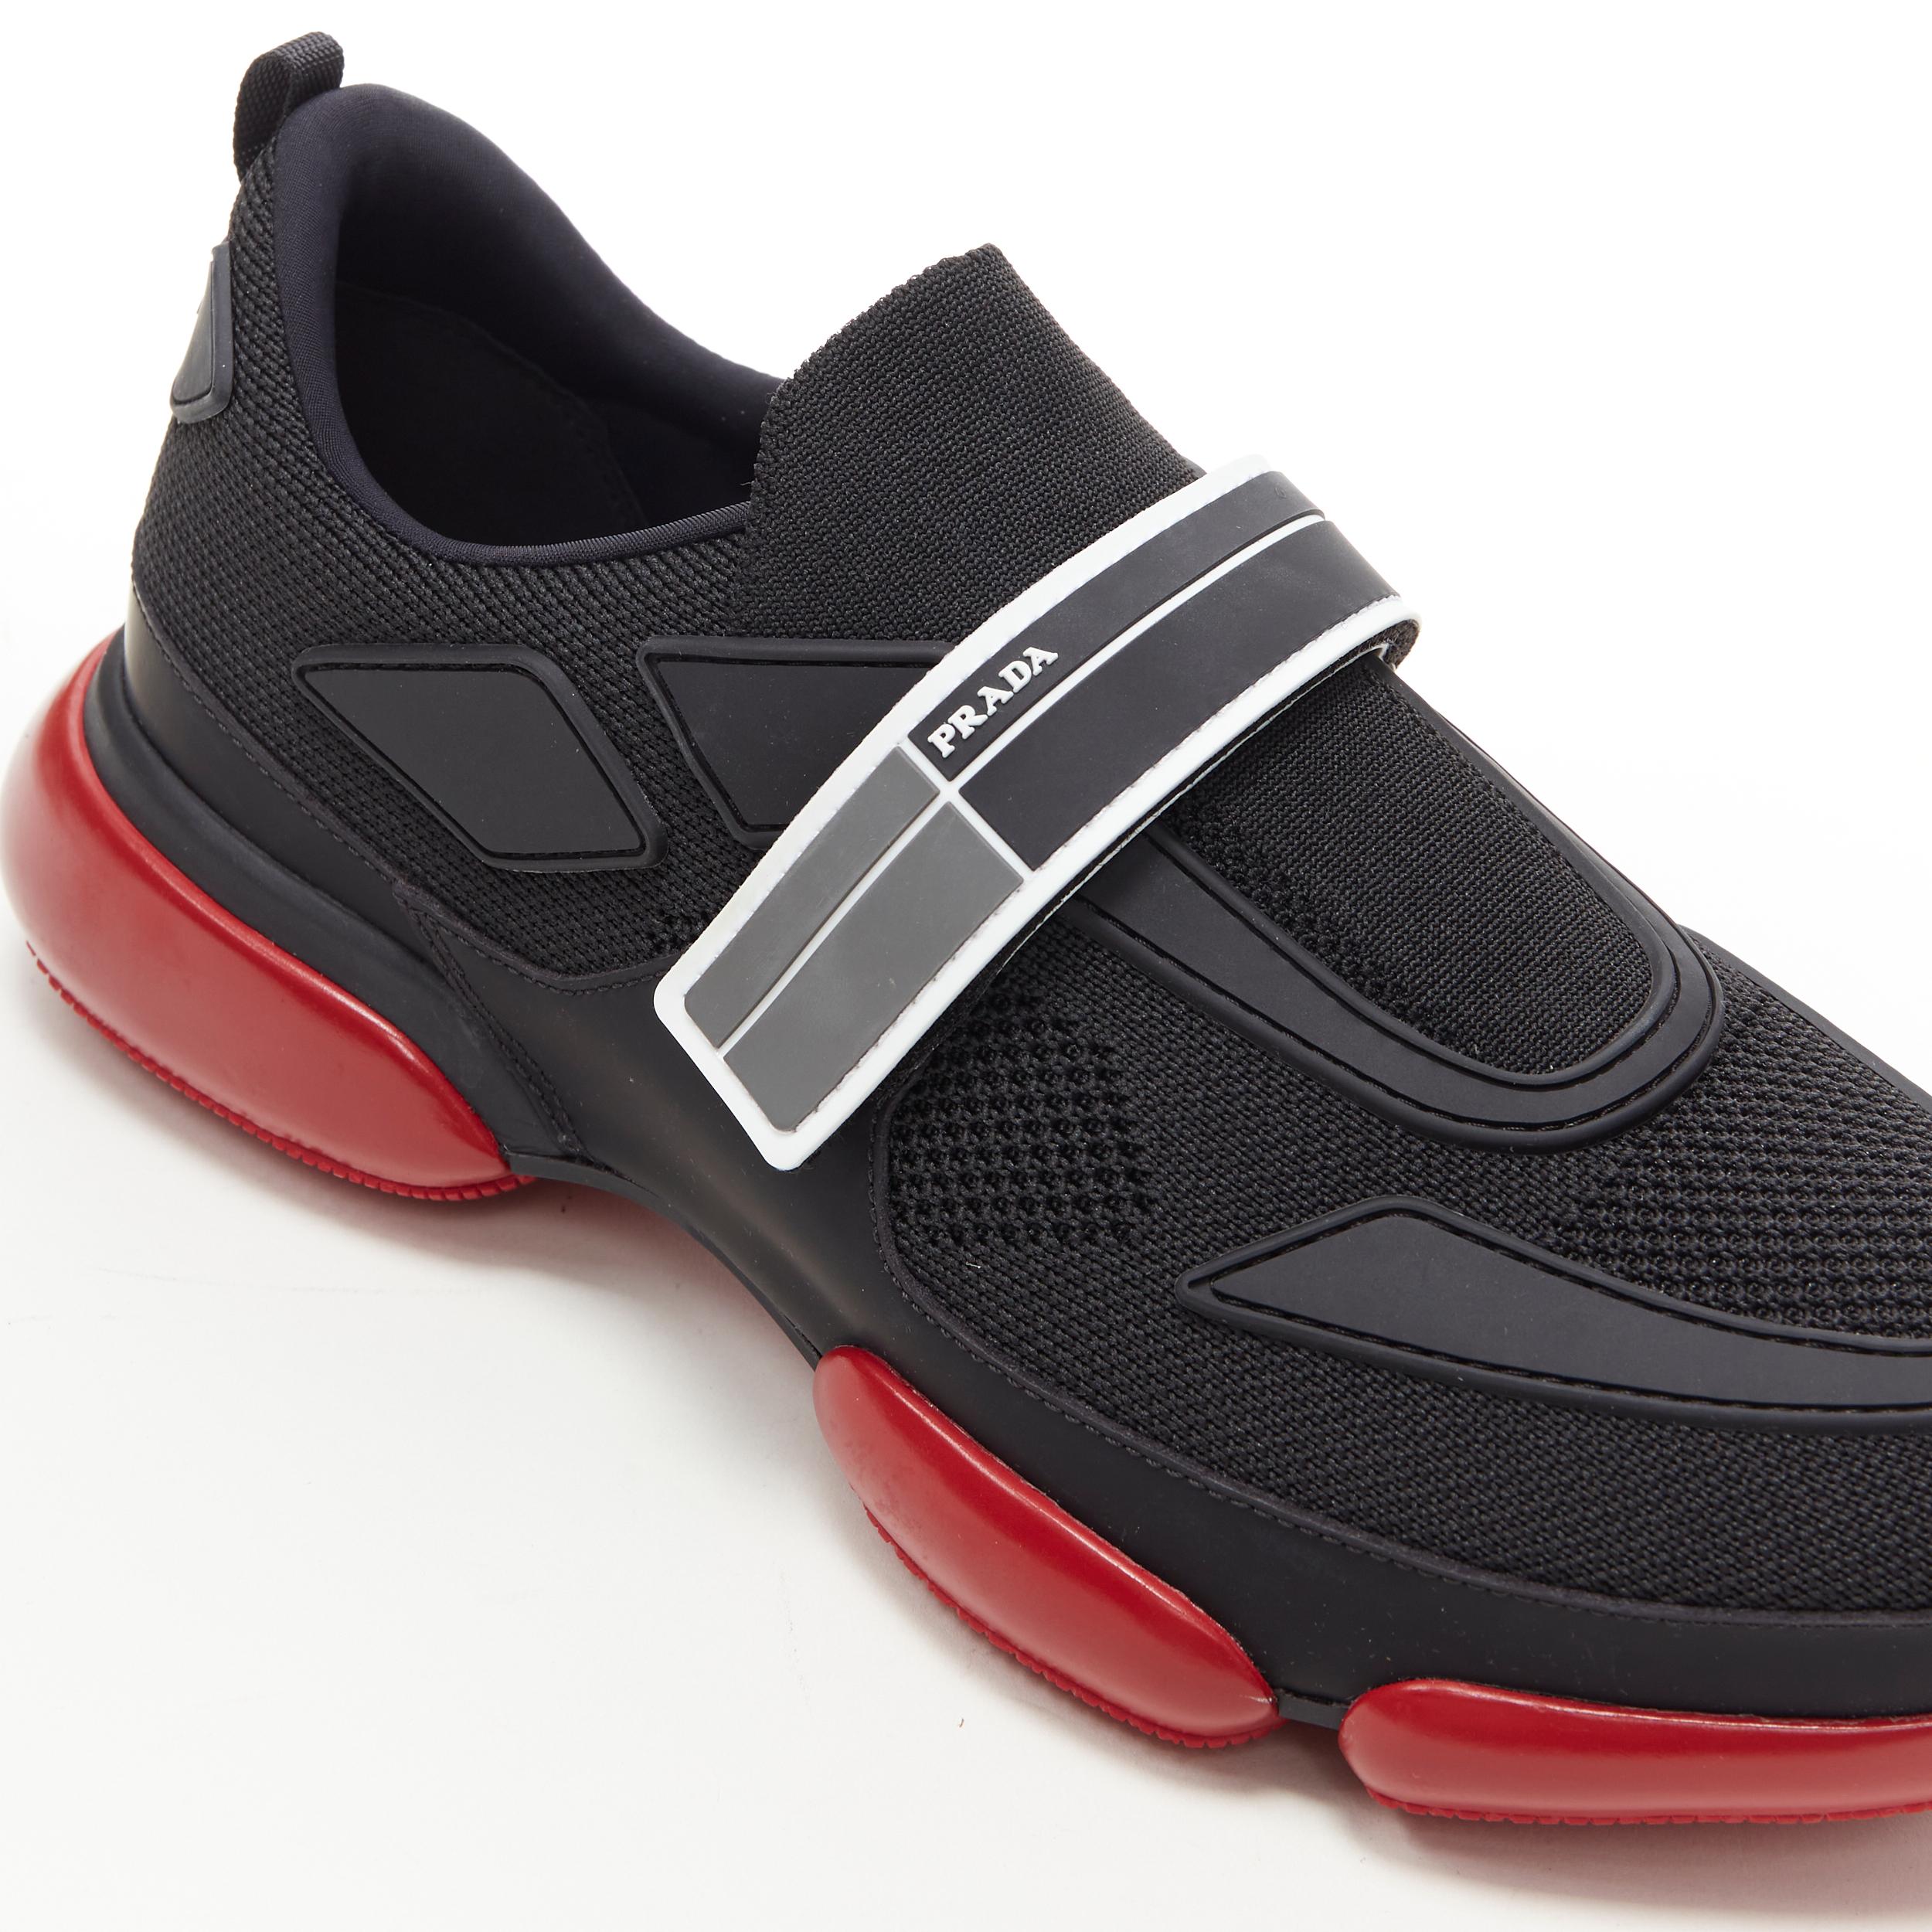 new PRADA Cloudbust black red logo rubber strapped low top sneakers UK7 US8 EU41 1